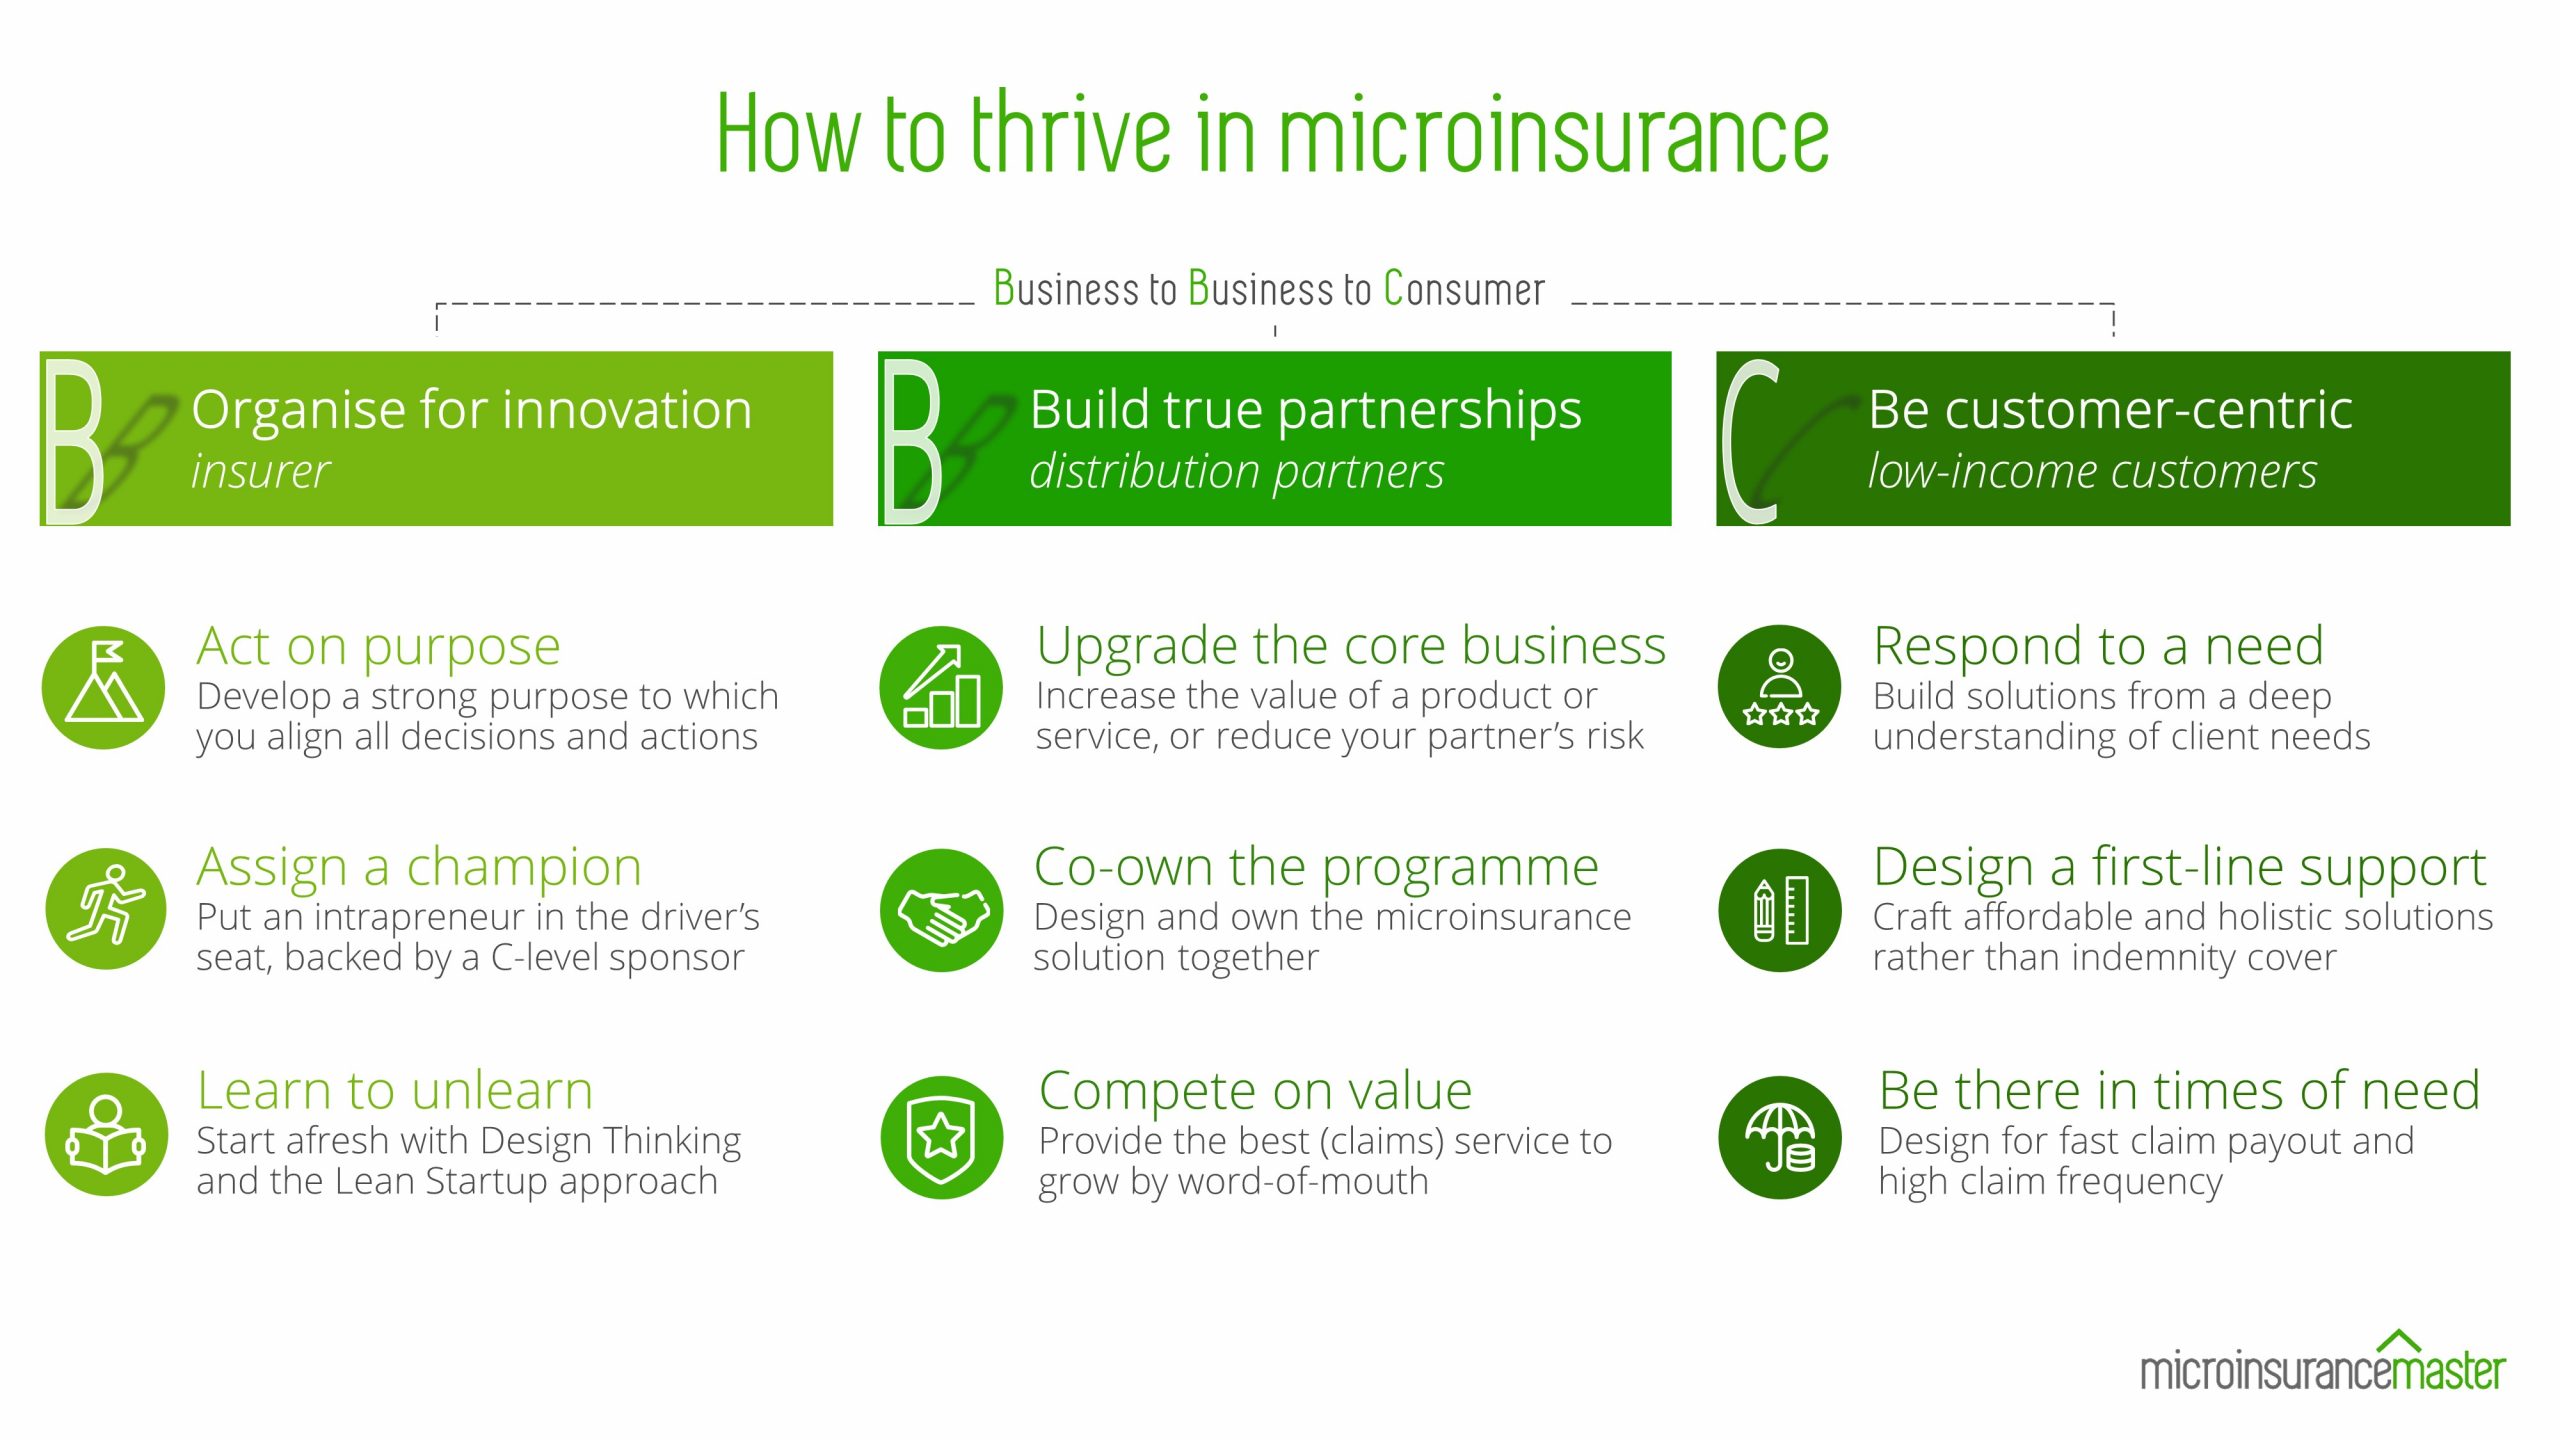 How to thrive in microinsurance